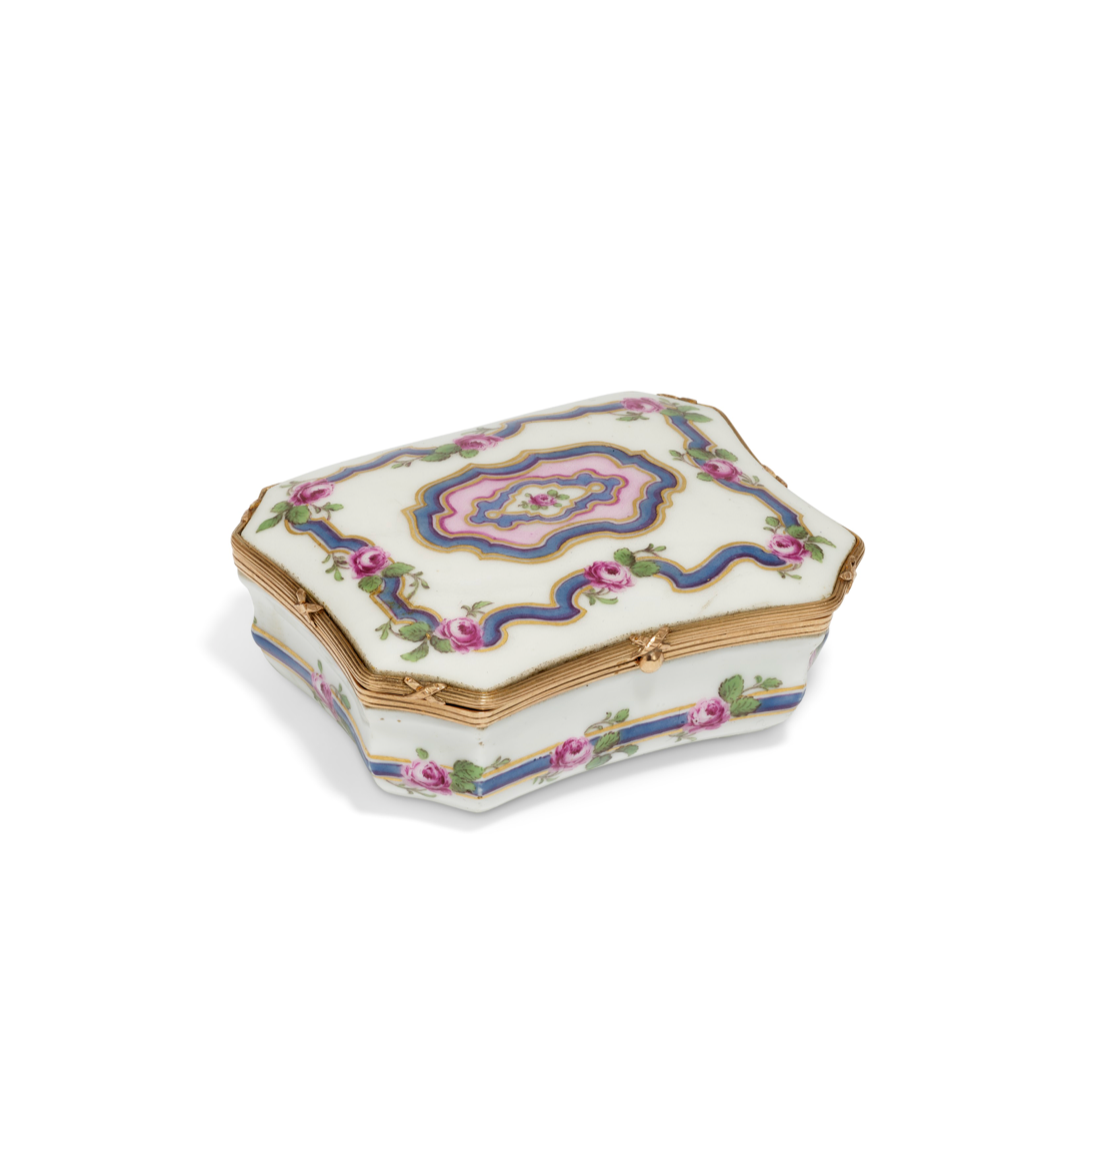 GOLD-MOUNTED GERMAN PORCELAIN SNUFF-BOX AND COVER Christie's